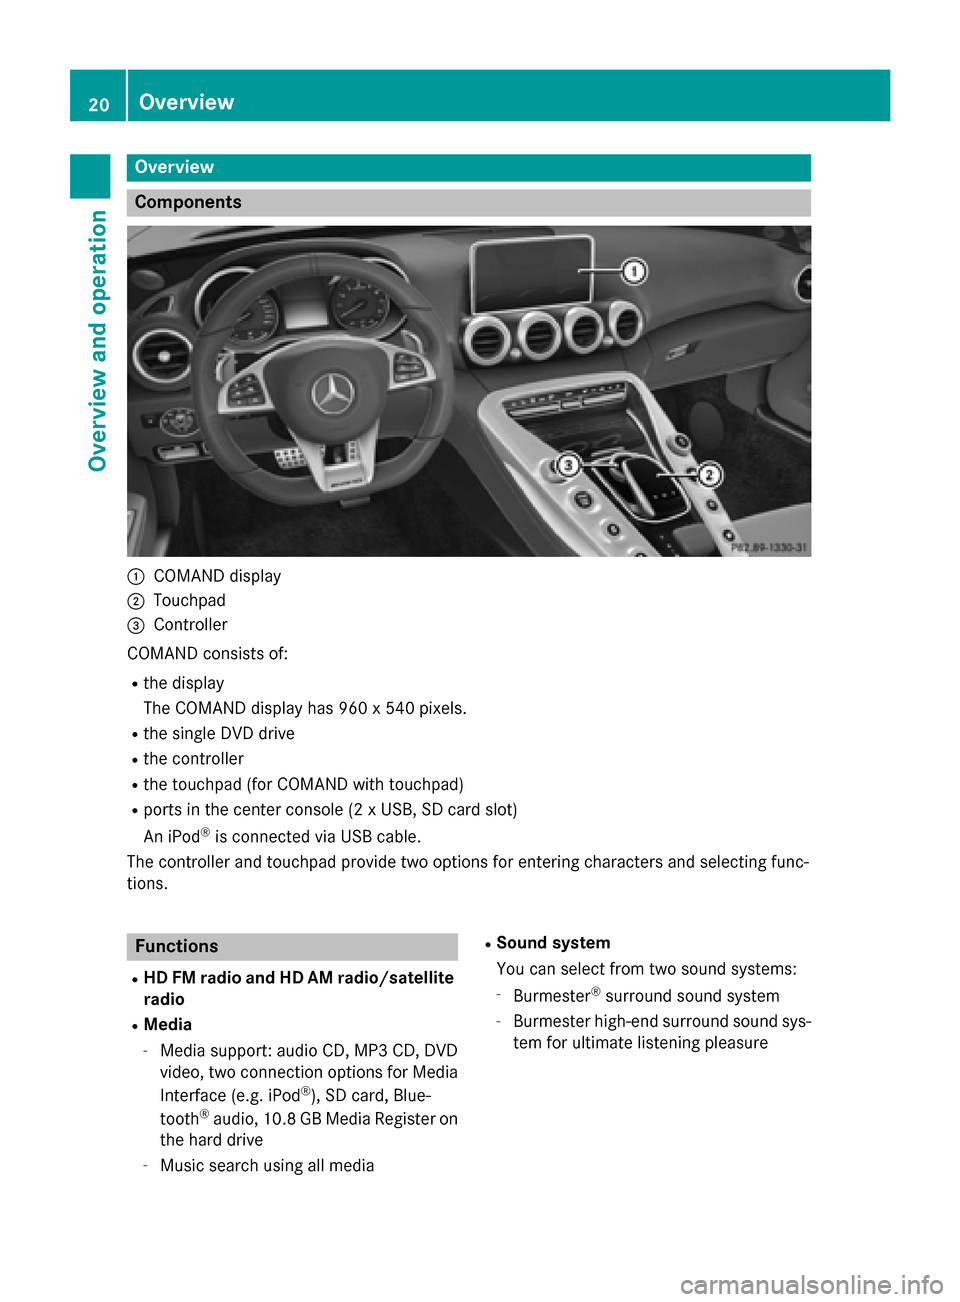 MERCEDES-BENZ AMG GT S 2016 C190 Comand Manual Overview
Components
:COMAND display
;Touchpad
=Controller
COMAND consists of:
Rthe display
The COMAND display has 960 x 540 pixels.
Rthe single DVD drive
Rthe controller
Rthe touchpad (for COMAND with